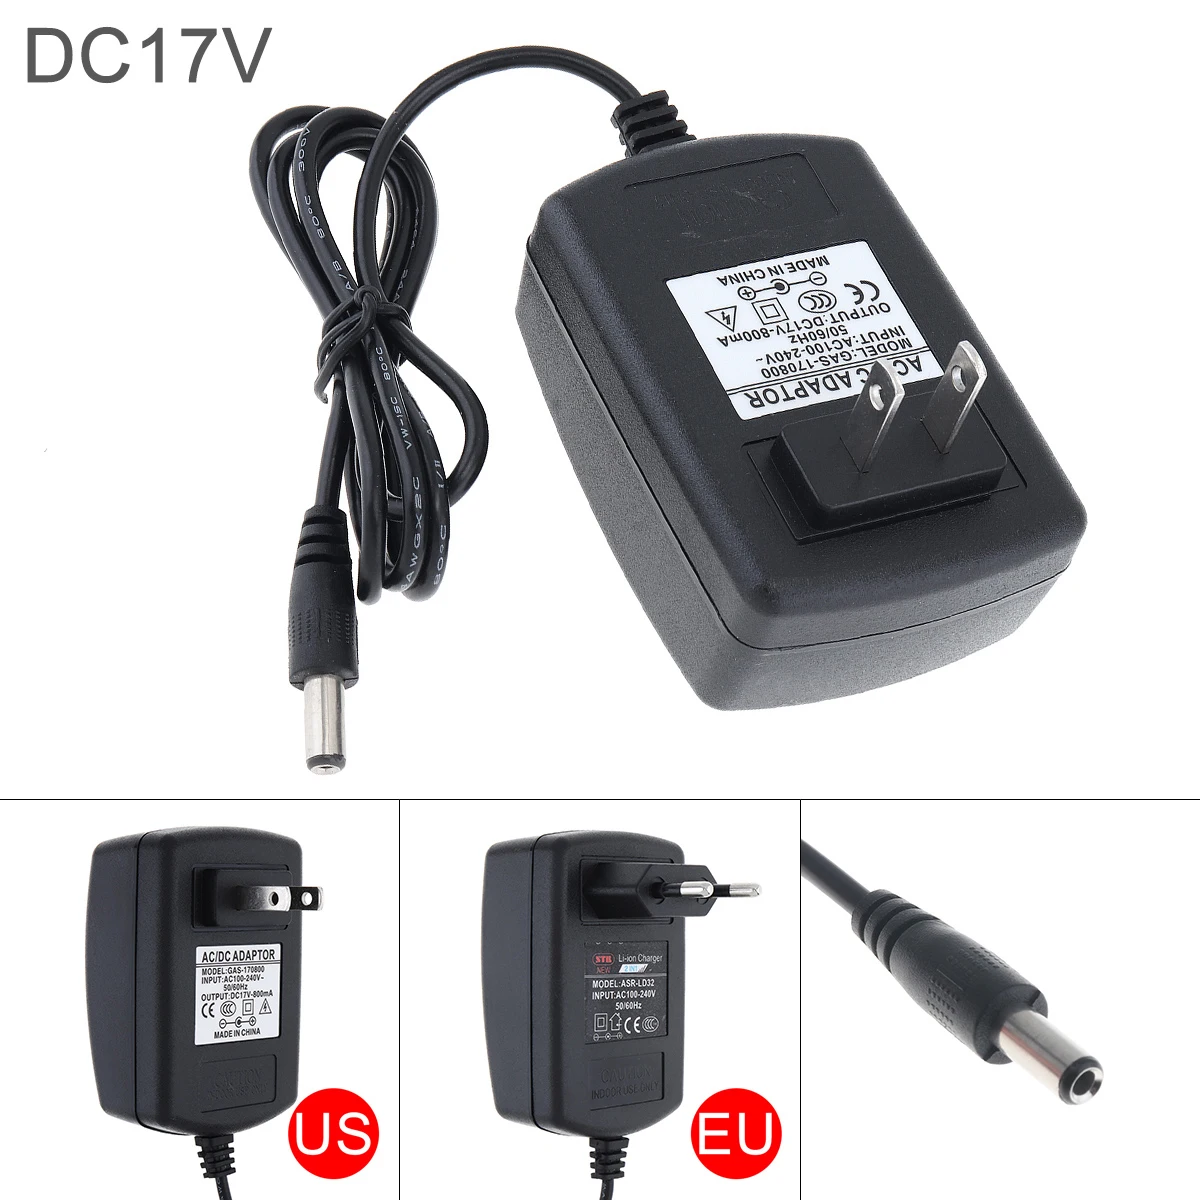 80cm Universal DC 16.8-17V Lithium Battery Rechargeable Charger 100-240V Power Supply for Lithium Electrical Drill Screwdriver palo 1 5v aa lithium ion battery 3400mwh aa rechargeable battery 2a li ion batteries and 1 5v lithium battery charger